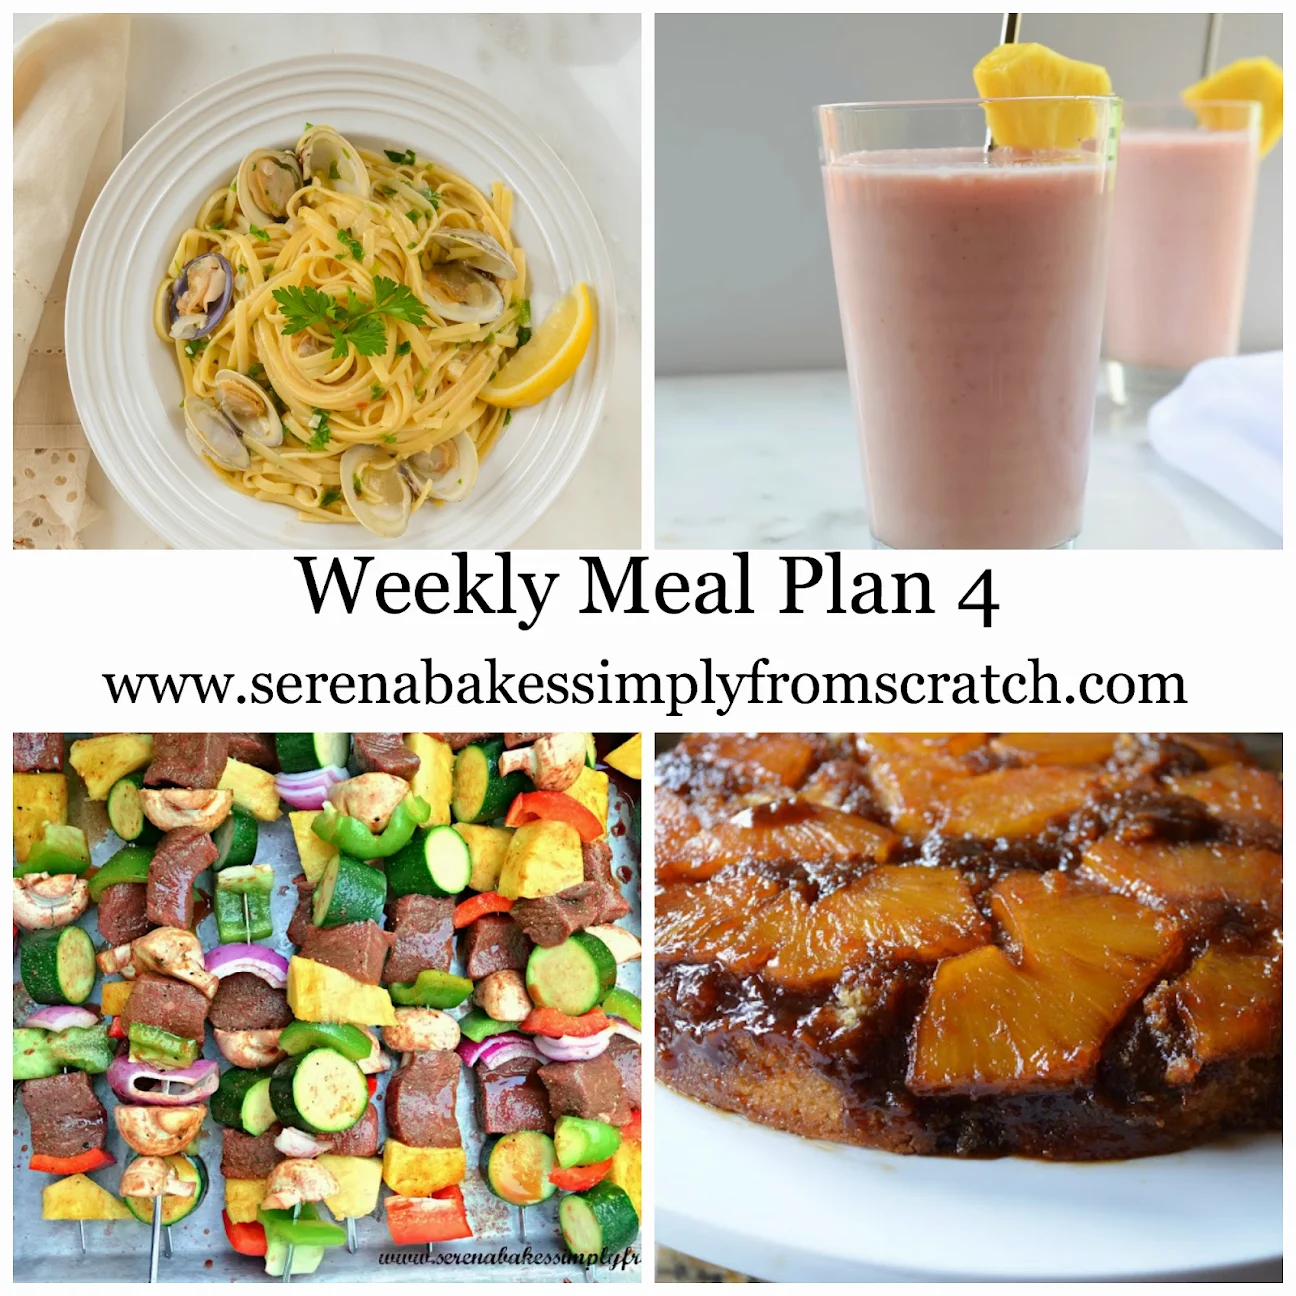 Weekly Meal Plan 4 | Serena Bakes Simply From Scratch